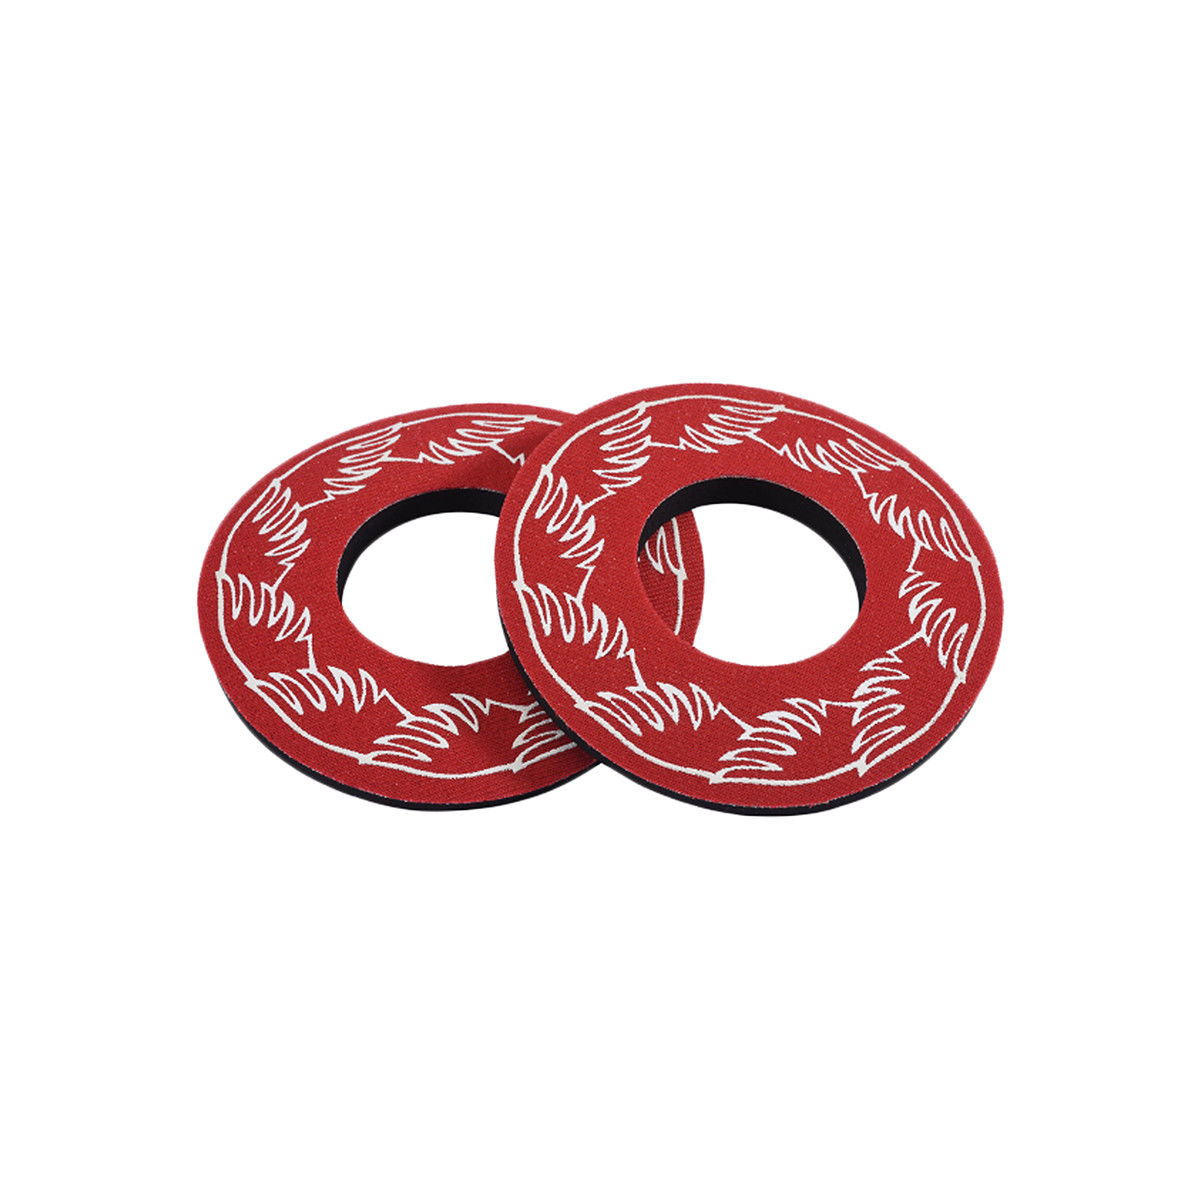 SE Racing Wing BMX Grip Donuts - Red